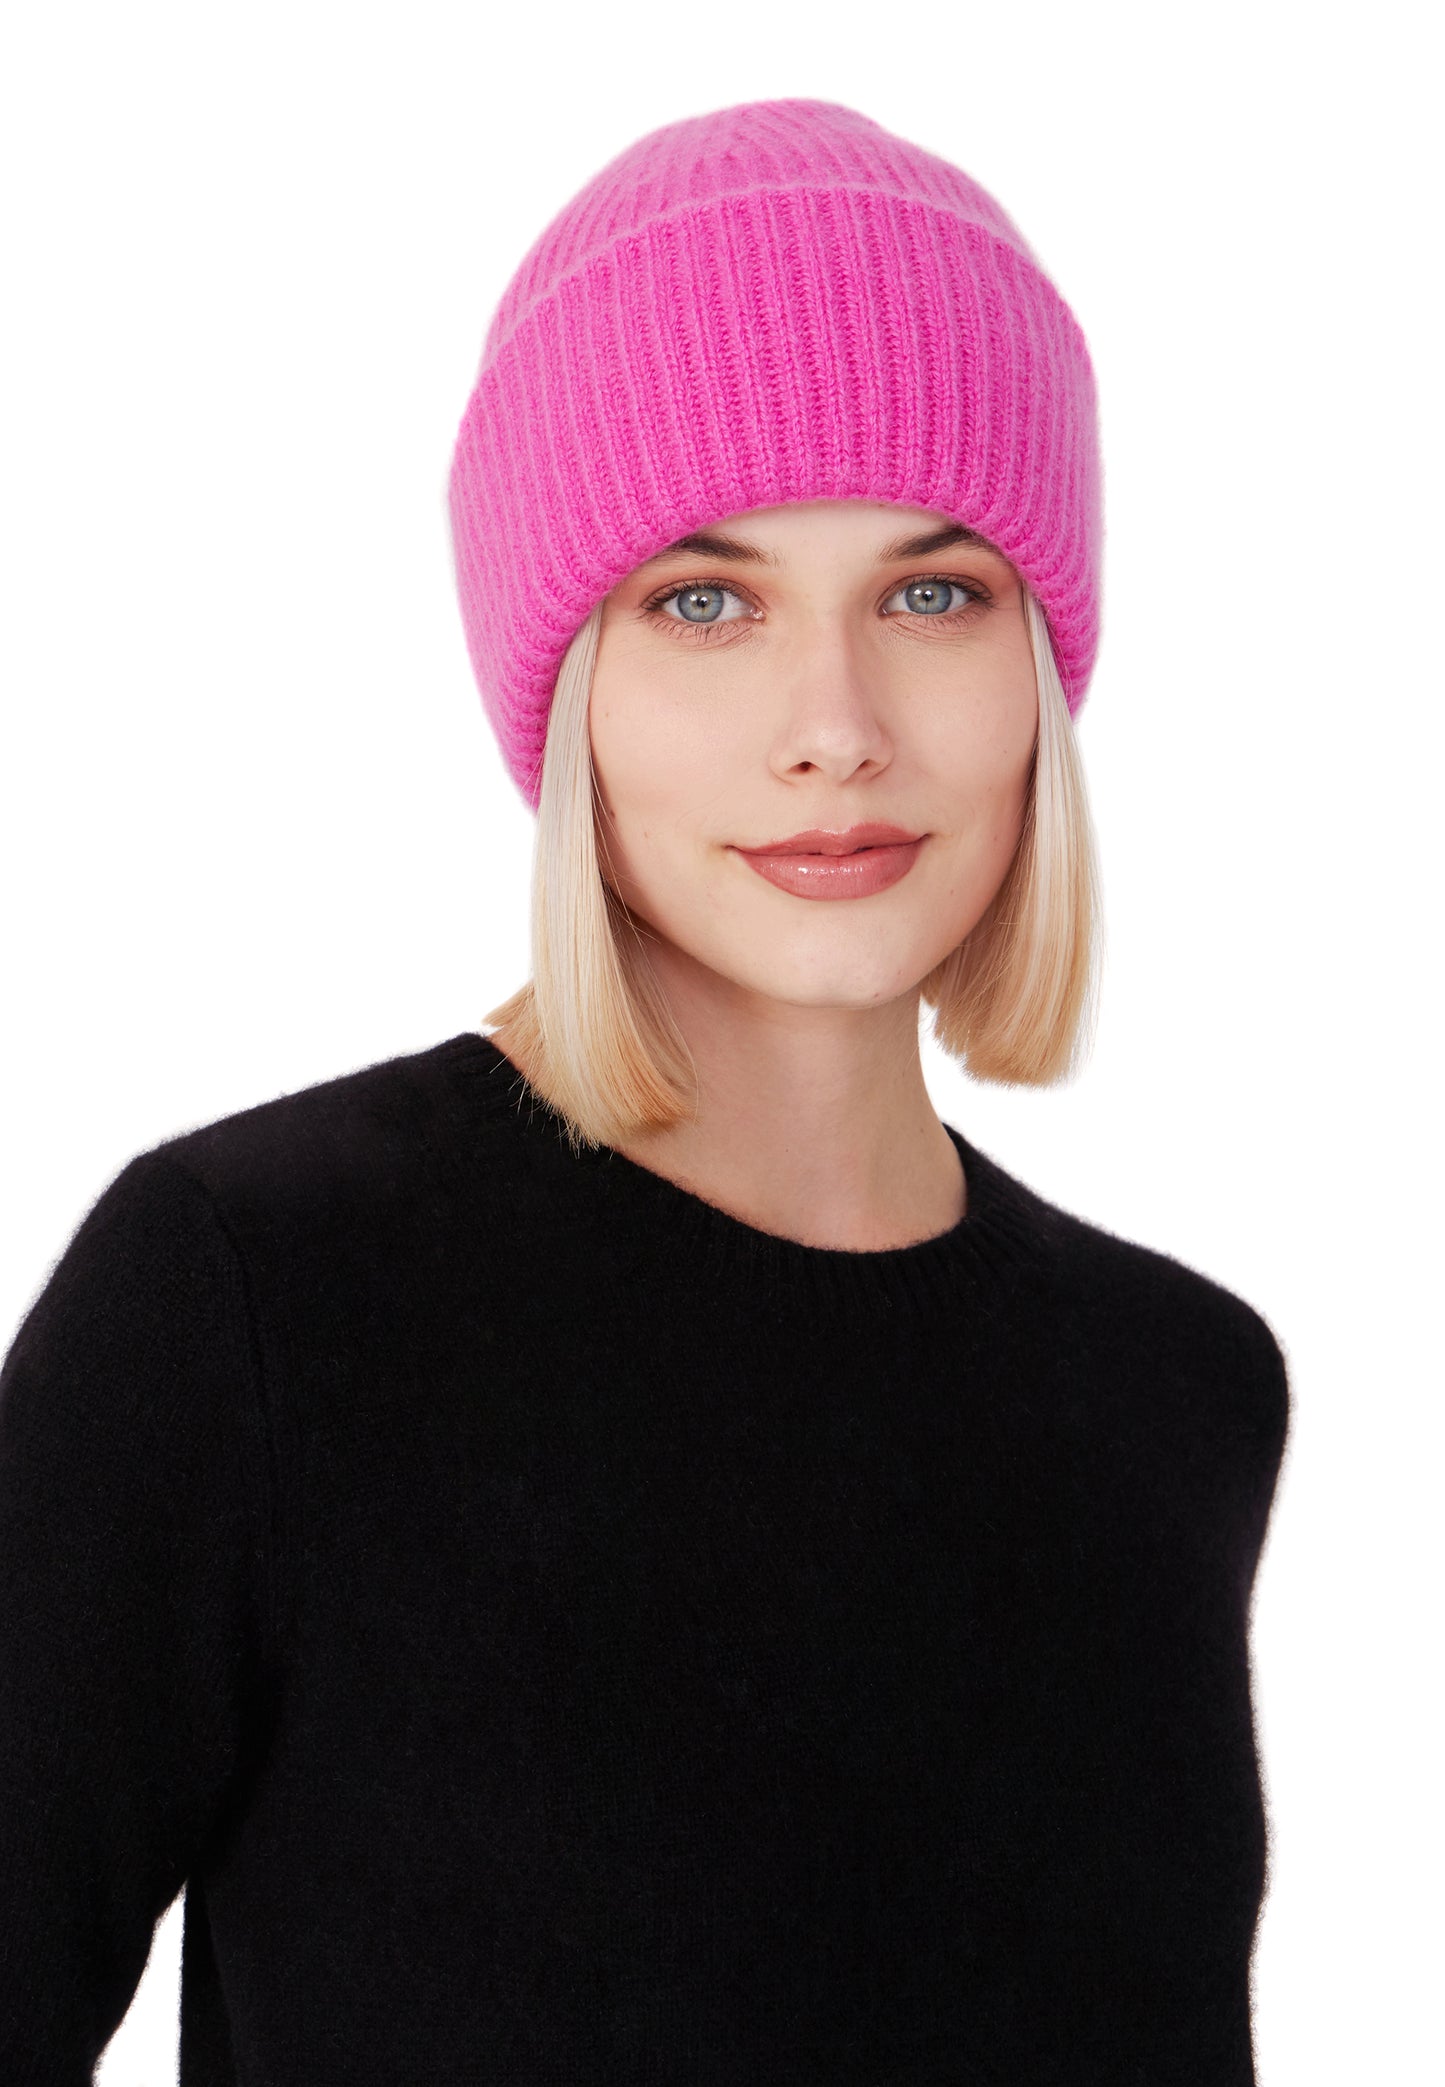 Style Republic 100% Pure Cashmere Chunky Knit Women's Beanie